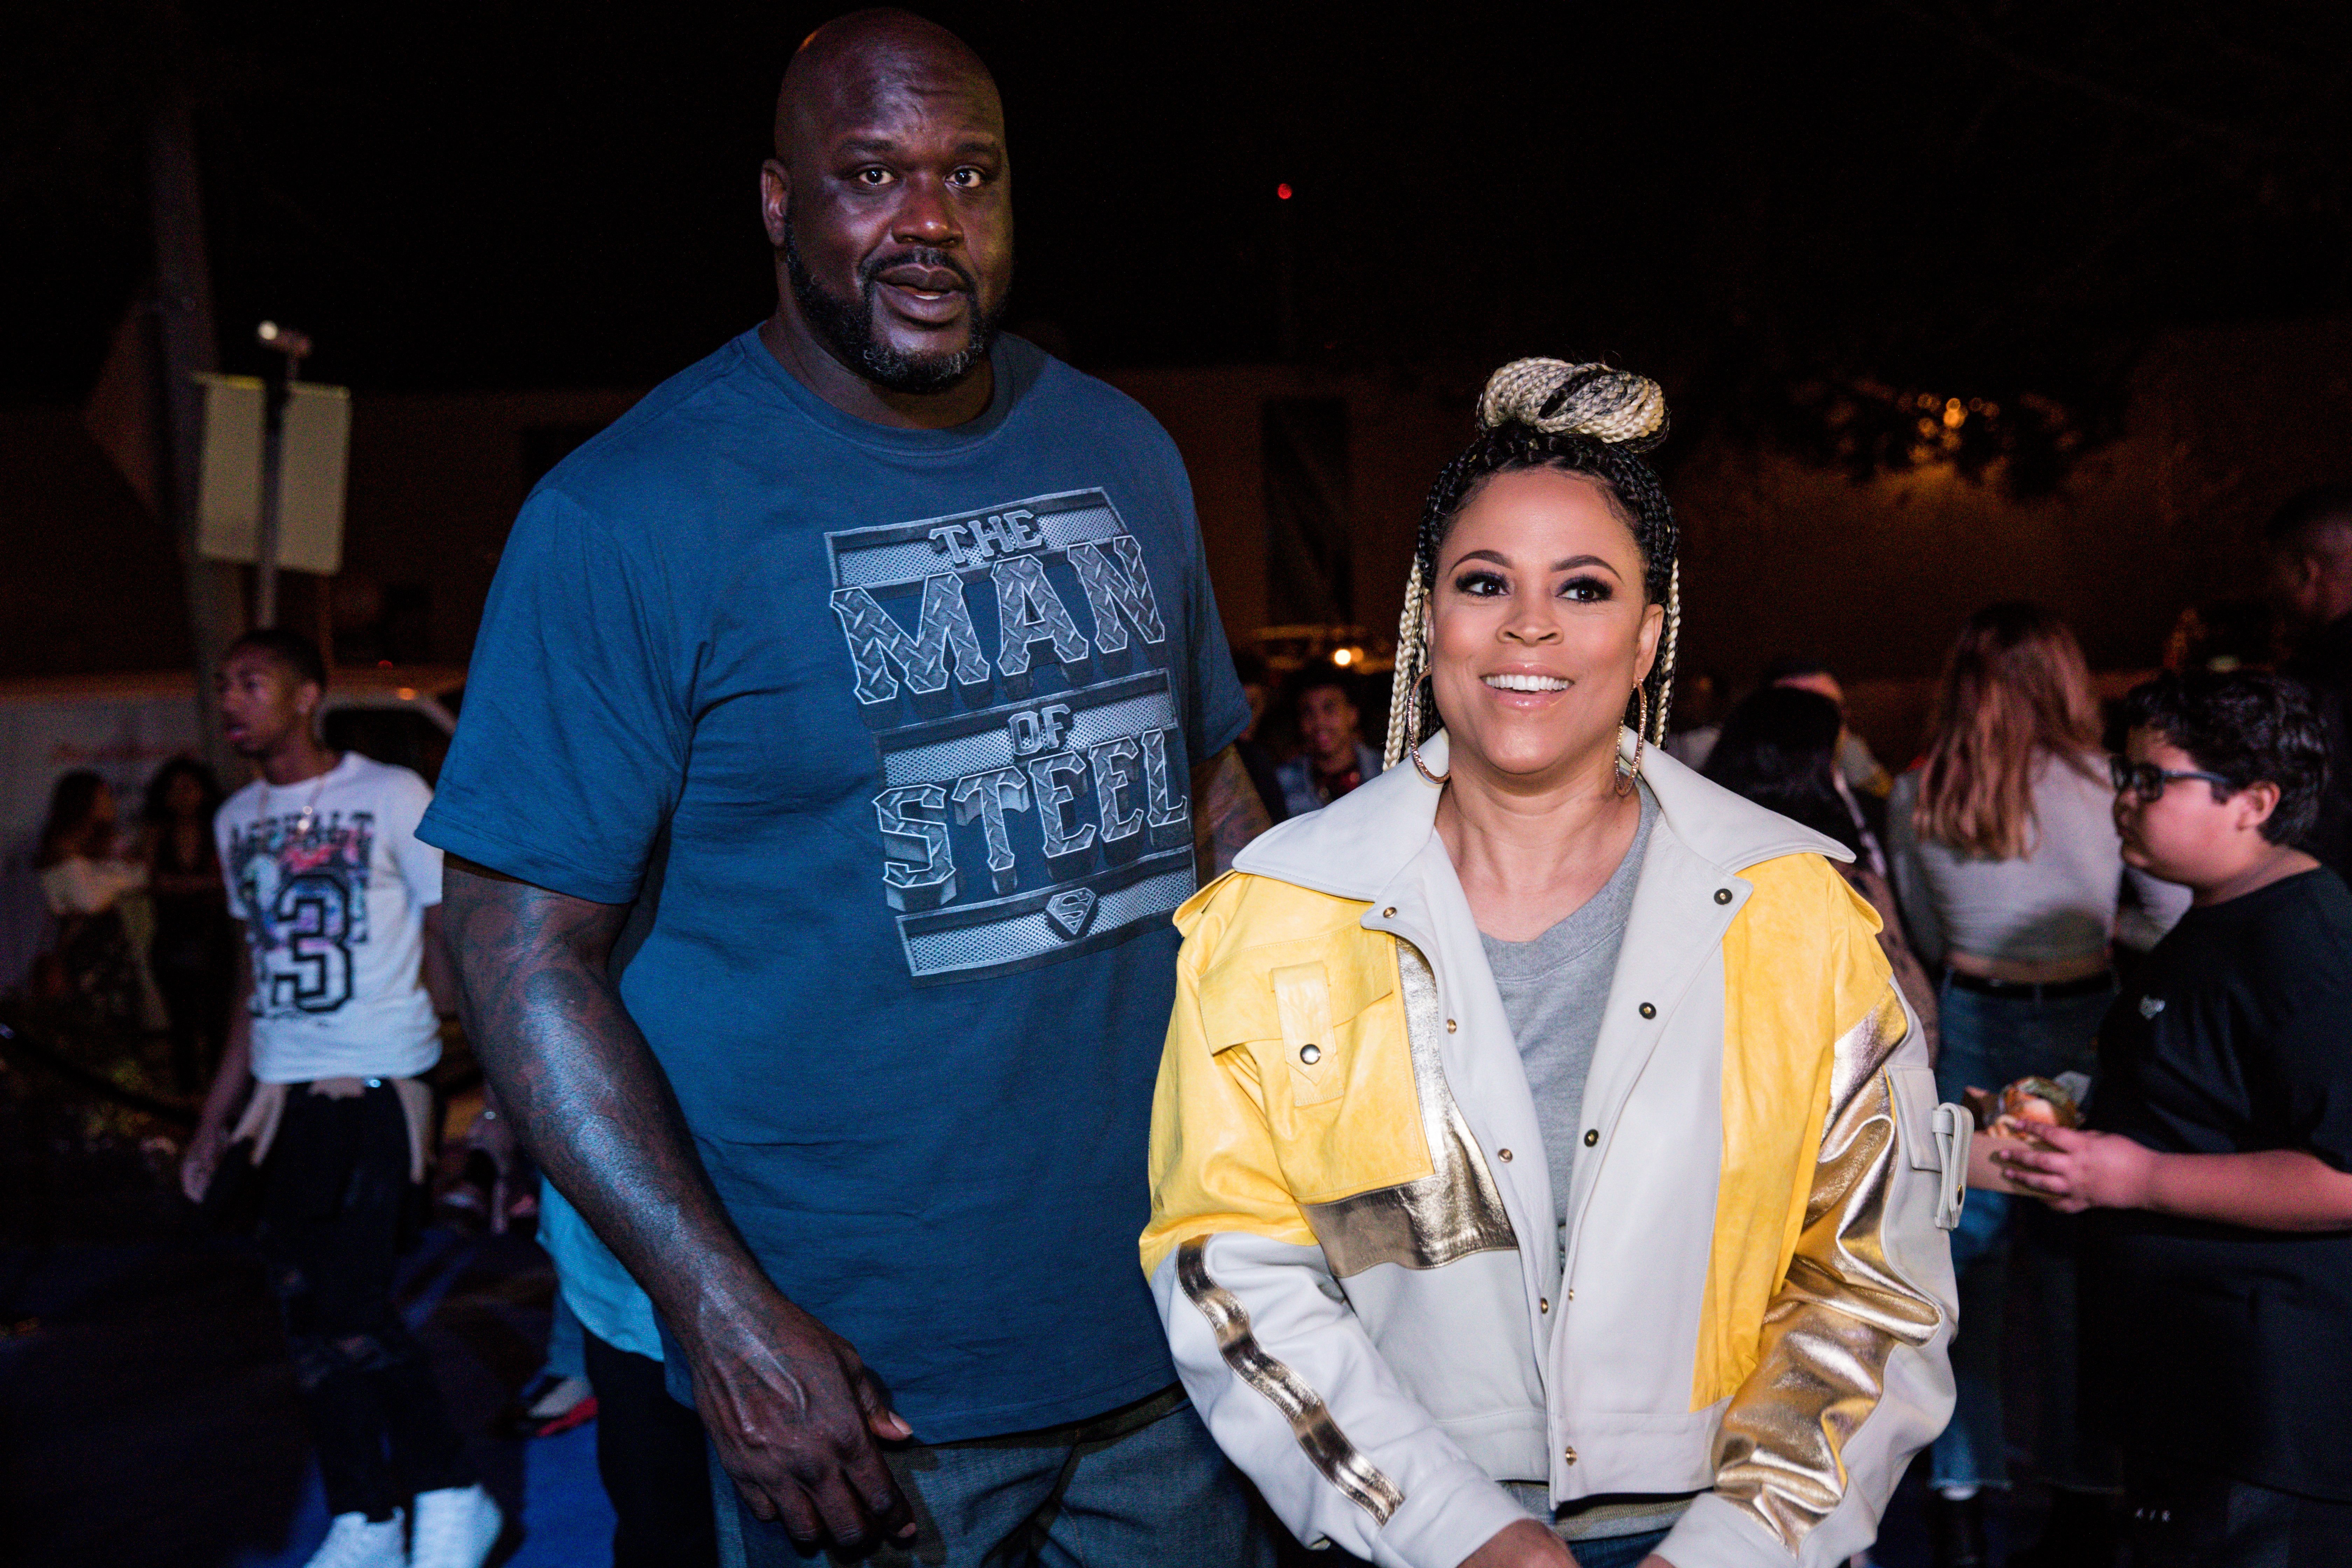 Shaquille & Shaunie O’Neal at their son Shareef’s 18th birthday party on Jan. 13, 2018 in California | Photo: Getty Images